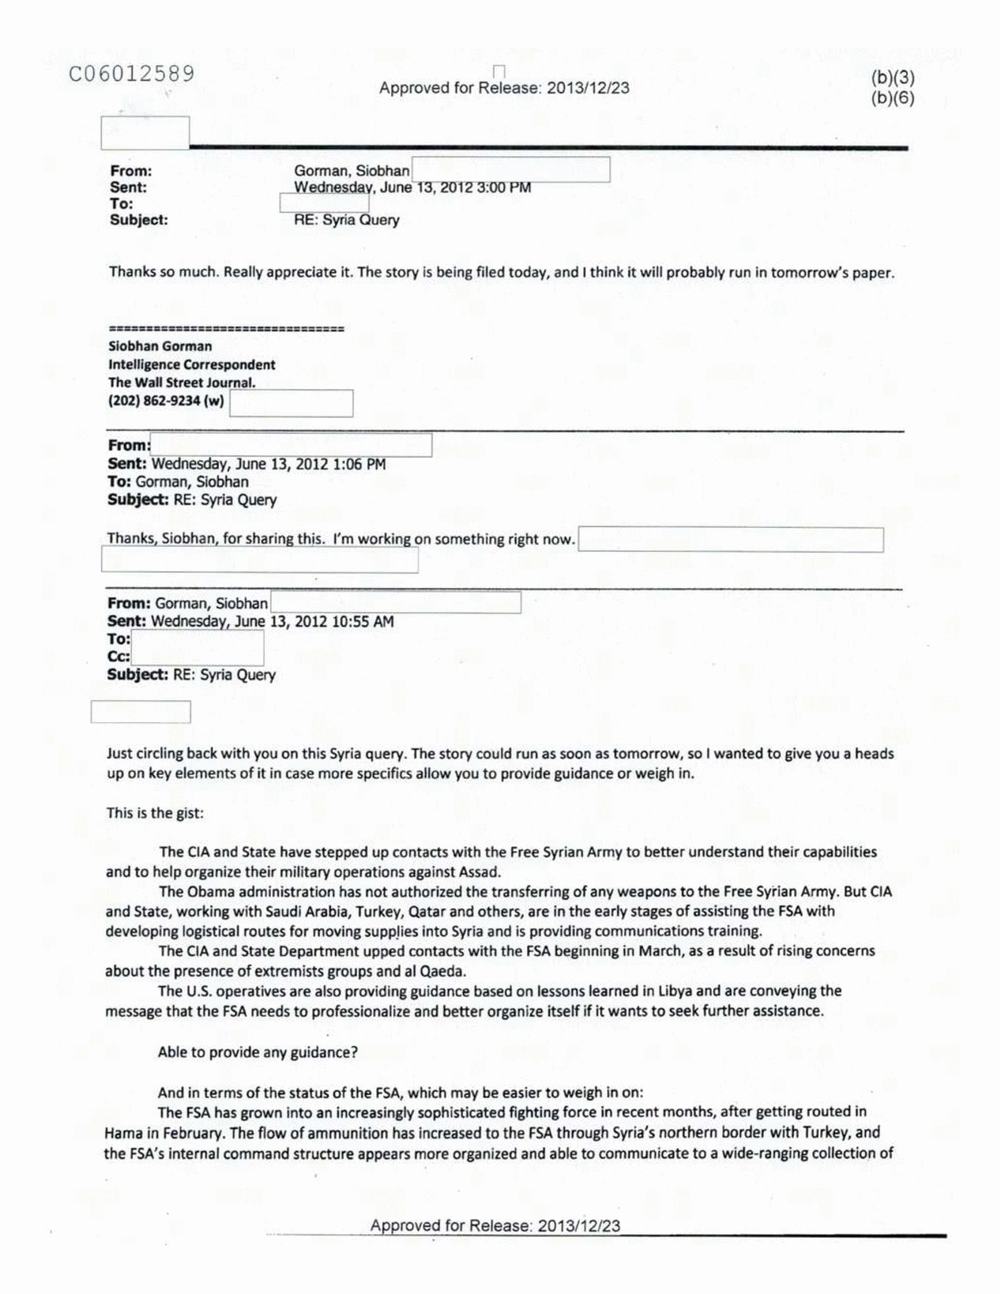 Page 138 from Email Correspondence Between Reporters and CIA Flacks